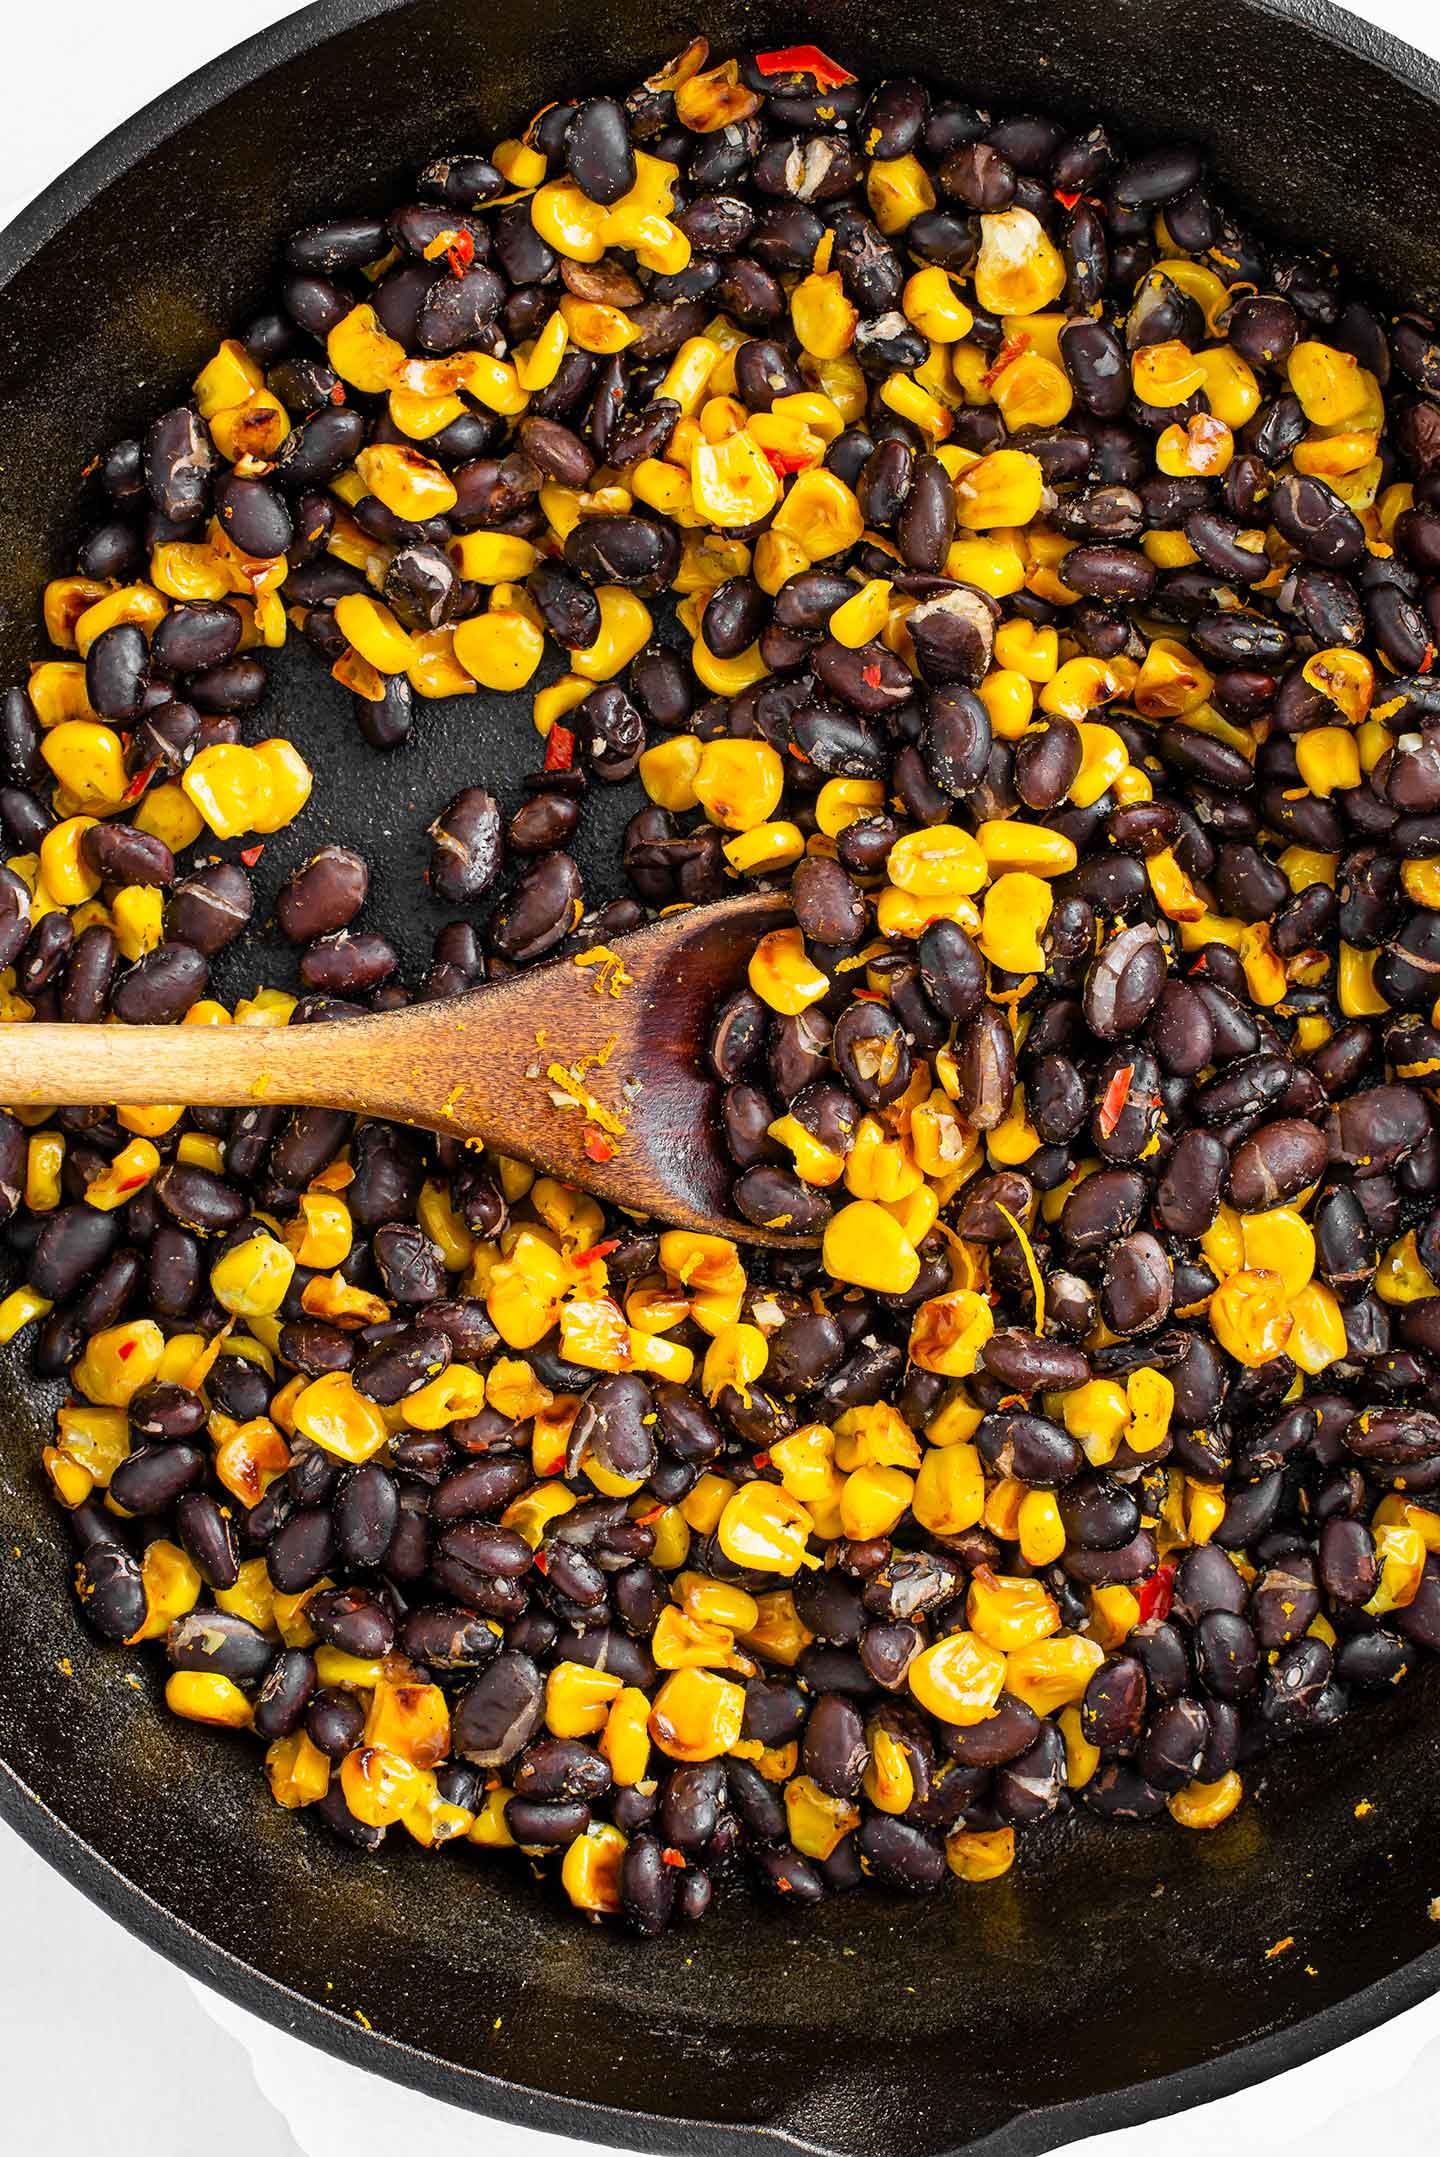 Top down view of corn and black beans in a cast iron skillet. Pieces of red chilli pepper are visible, the corn is nicely browned, and the beans have dried and split open.